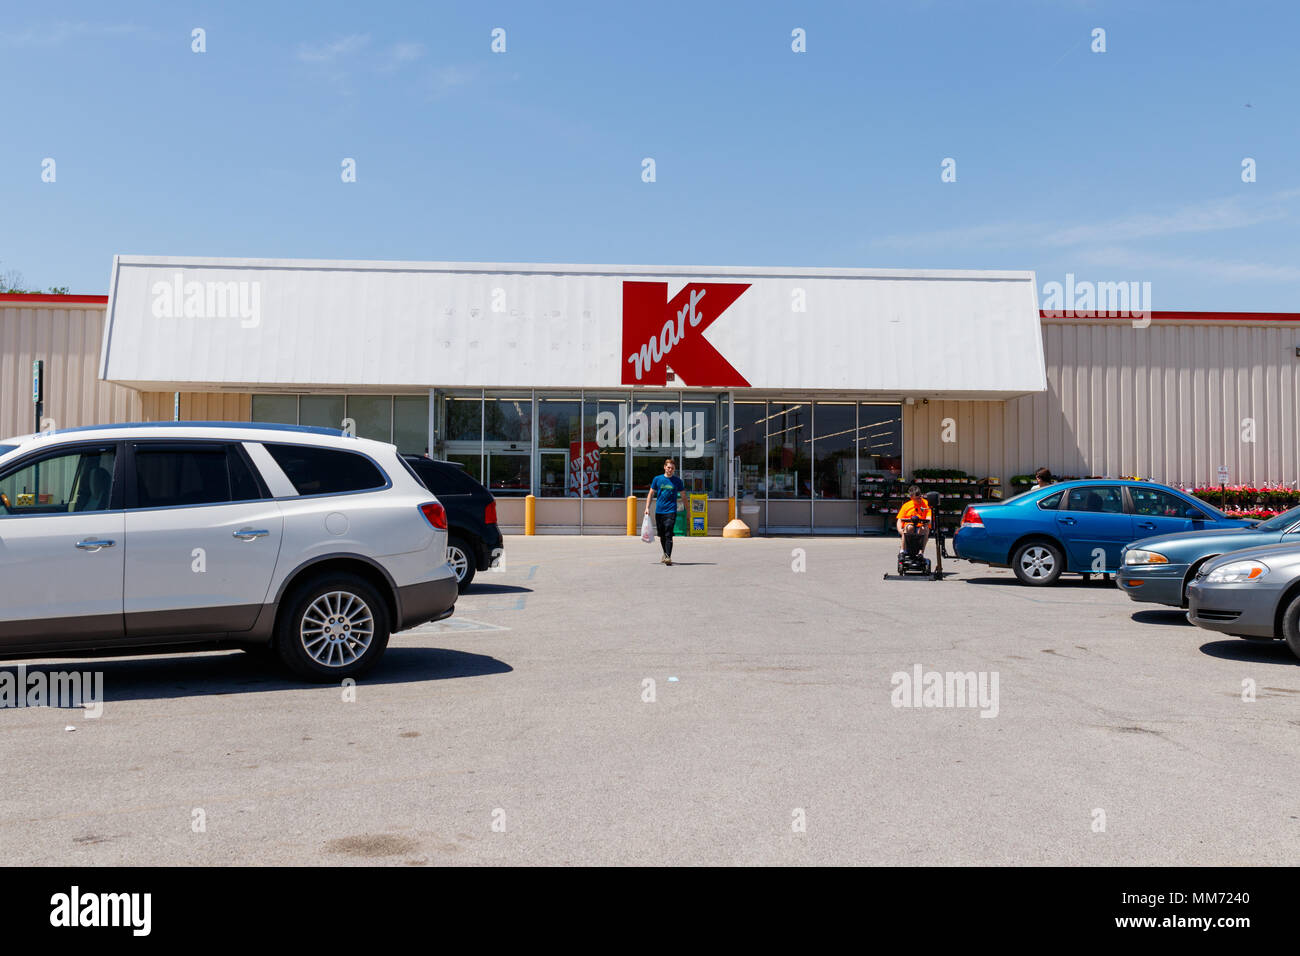 Peru - Circa May 2018: Kmart Retail Location. Kmart is a Subsidiary of Sears Holdings II Stock Photo